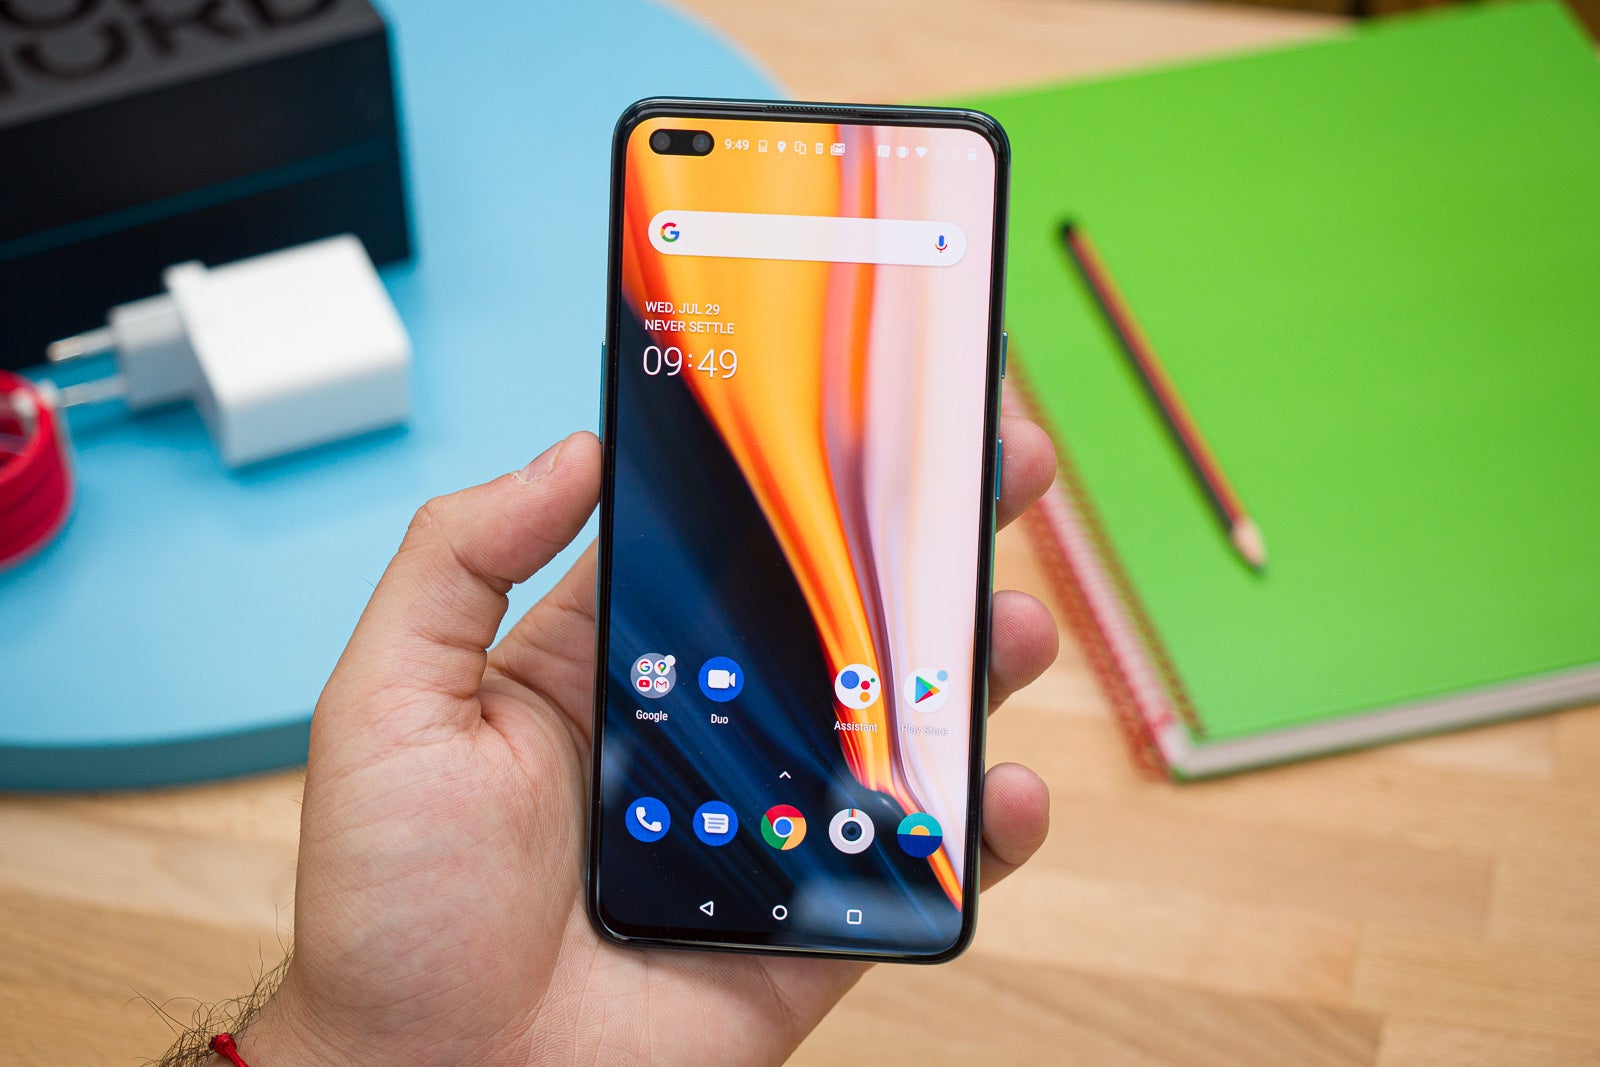 OnePlus Nord has a 6.4-inch AMOLED screen - OnePlus Nord Long-term Review: Even better than you thought